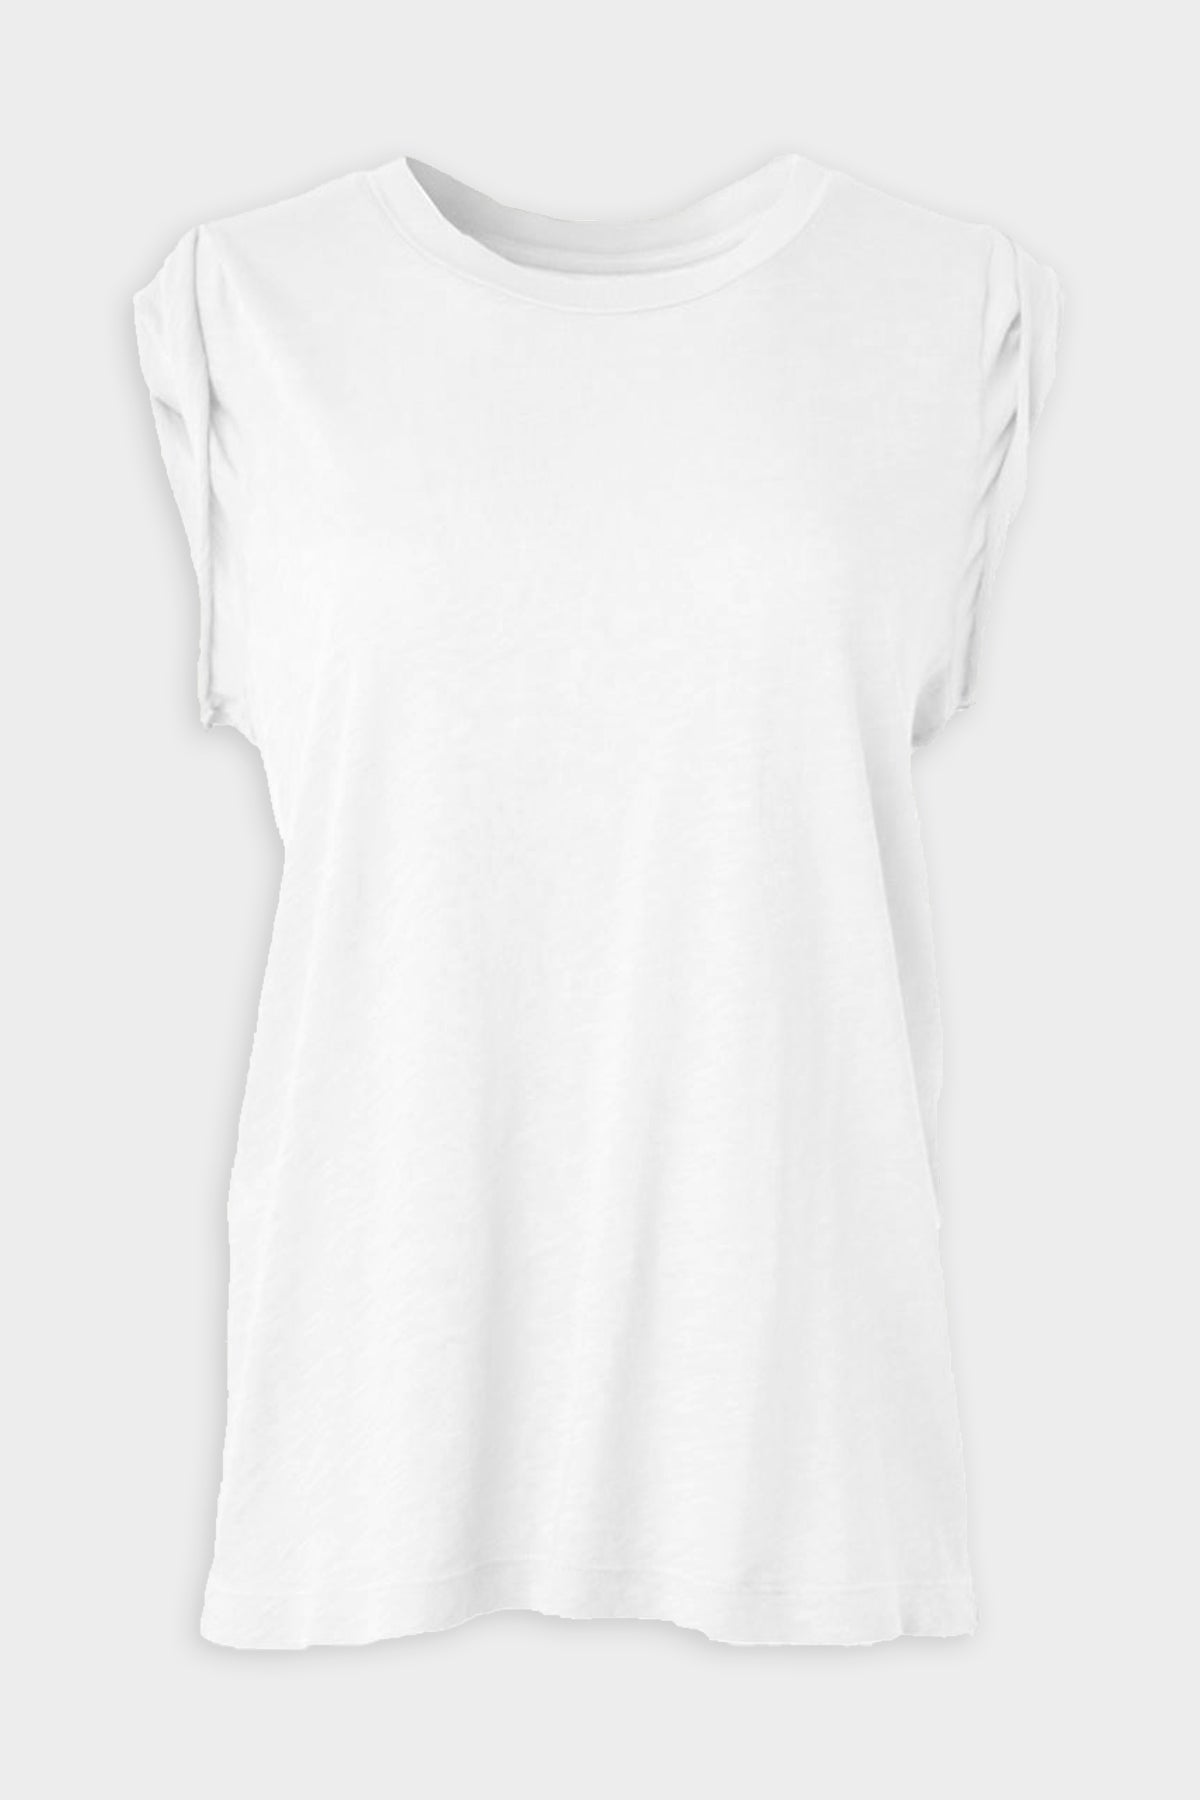 Kelsey Roll Sleeve Tee in White - shop-olivia.com